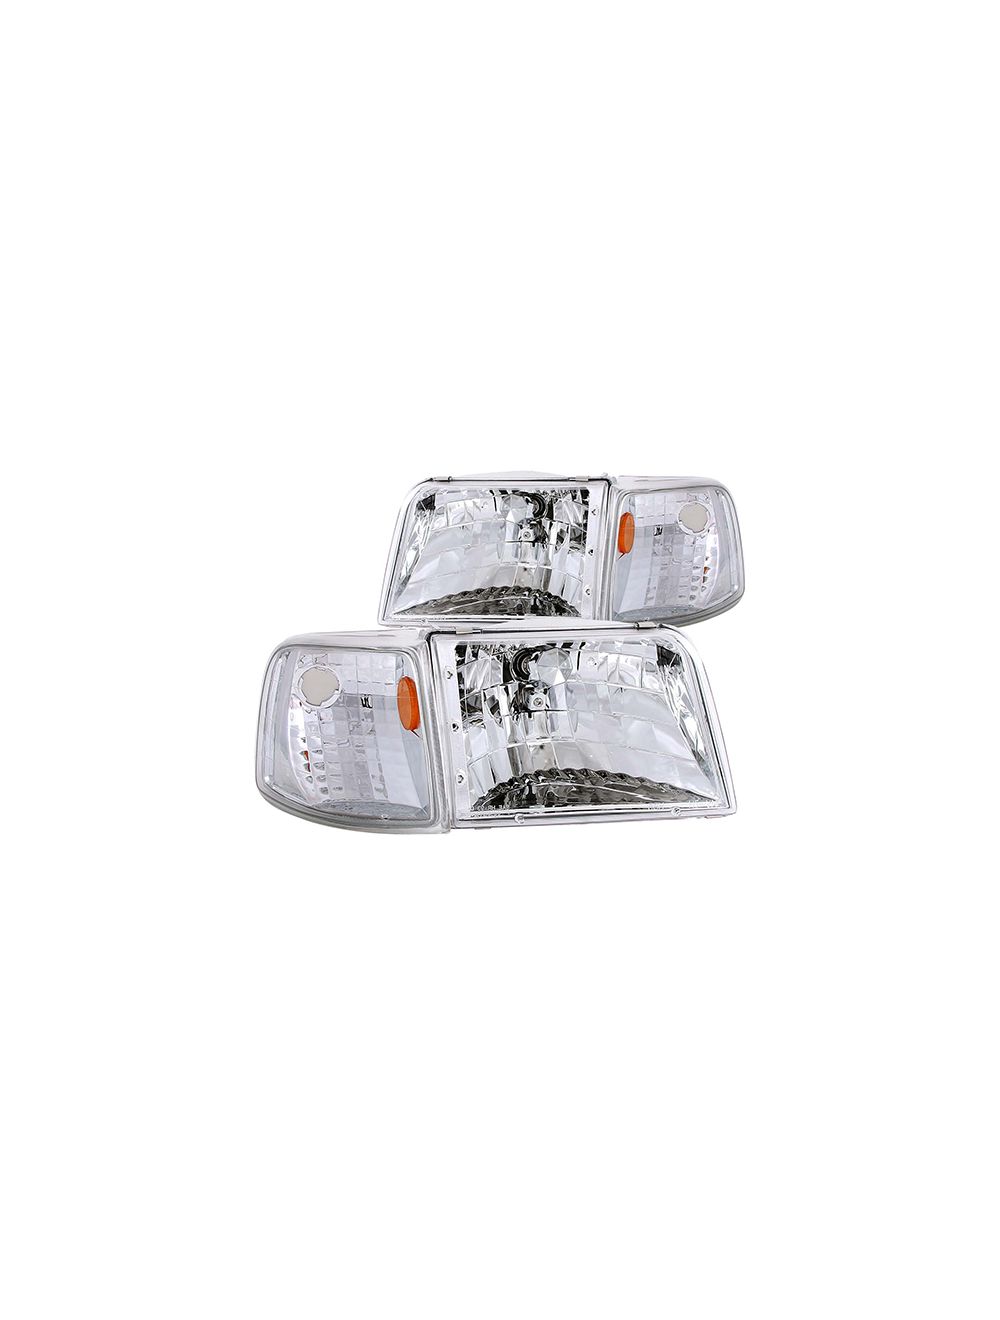 Anzo ANZ111119 Clear with Amber Corners Headlights for Ford 1993 - 1997 Ranger